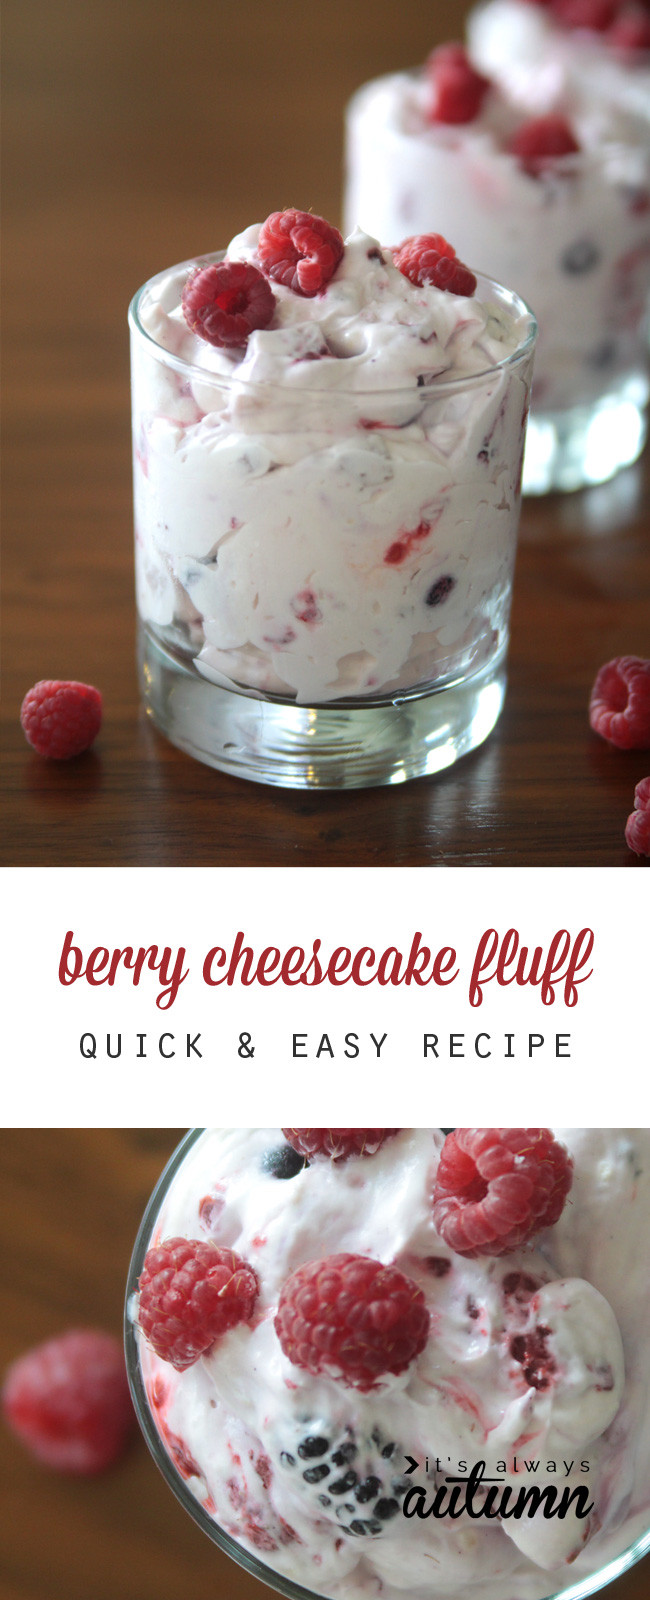 Easy Christmas Desserts
 berry cheesecake fluff a lighter holiday dessert It s